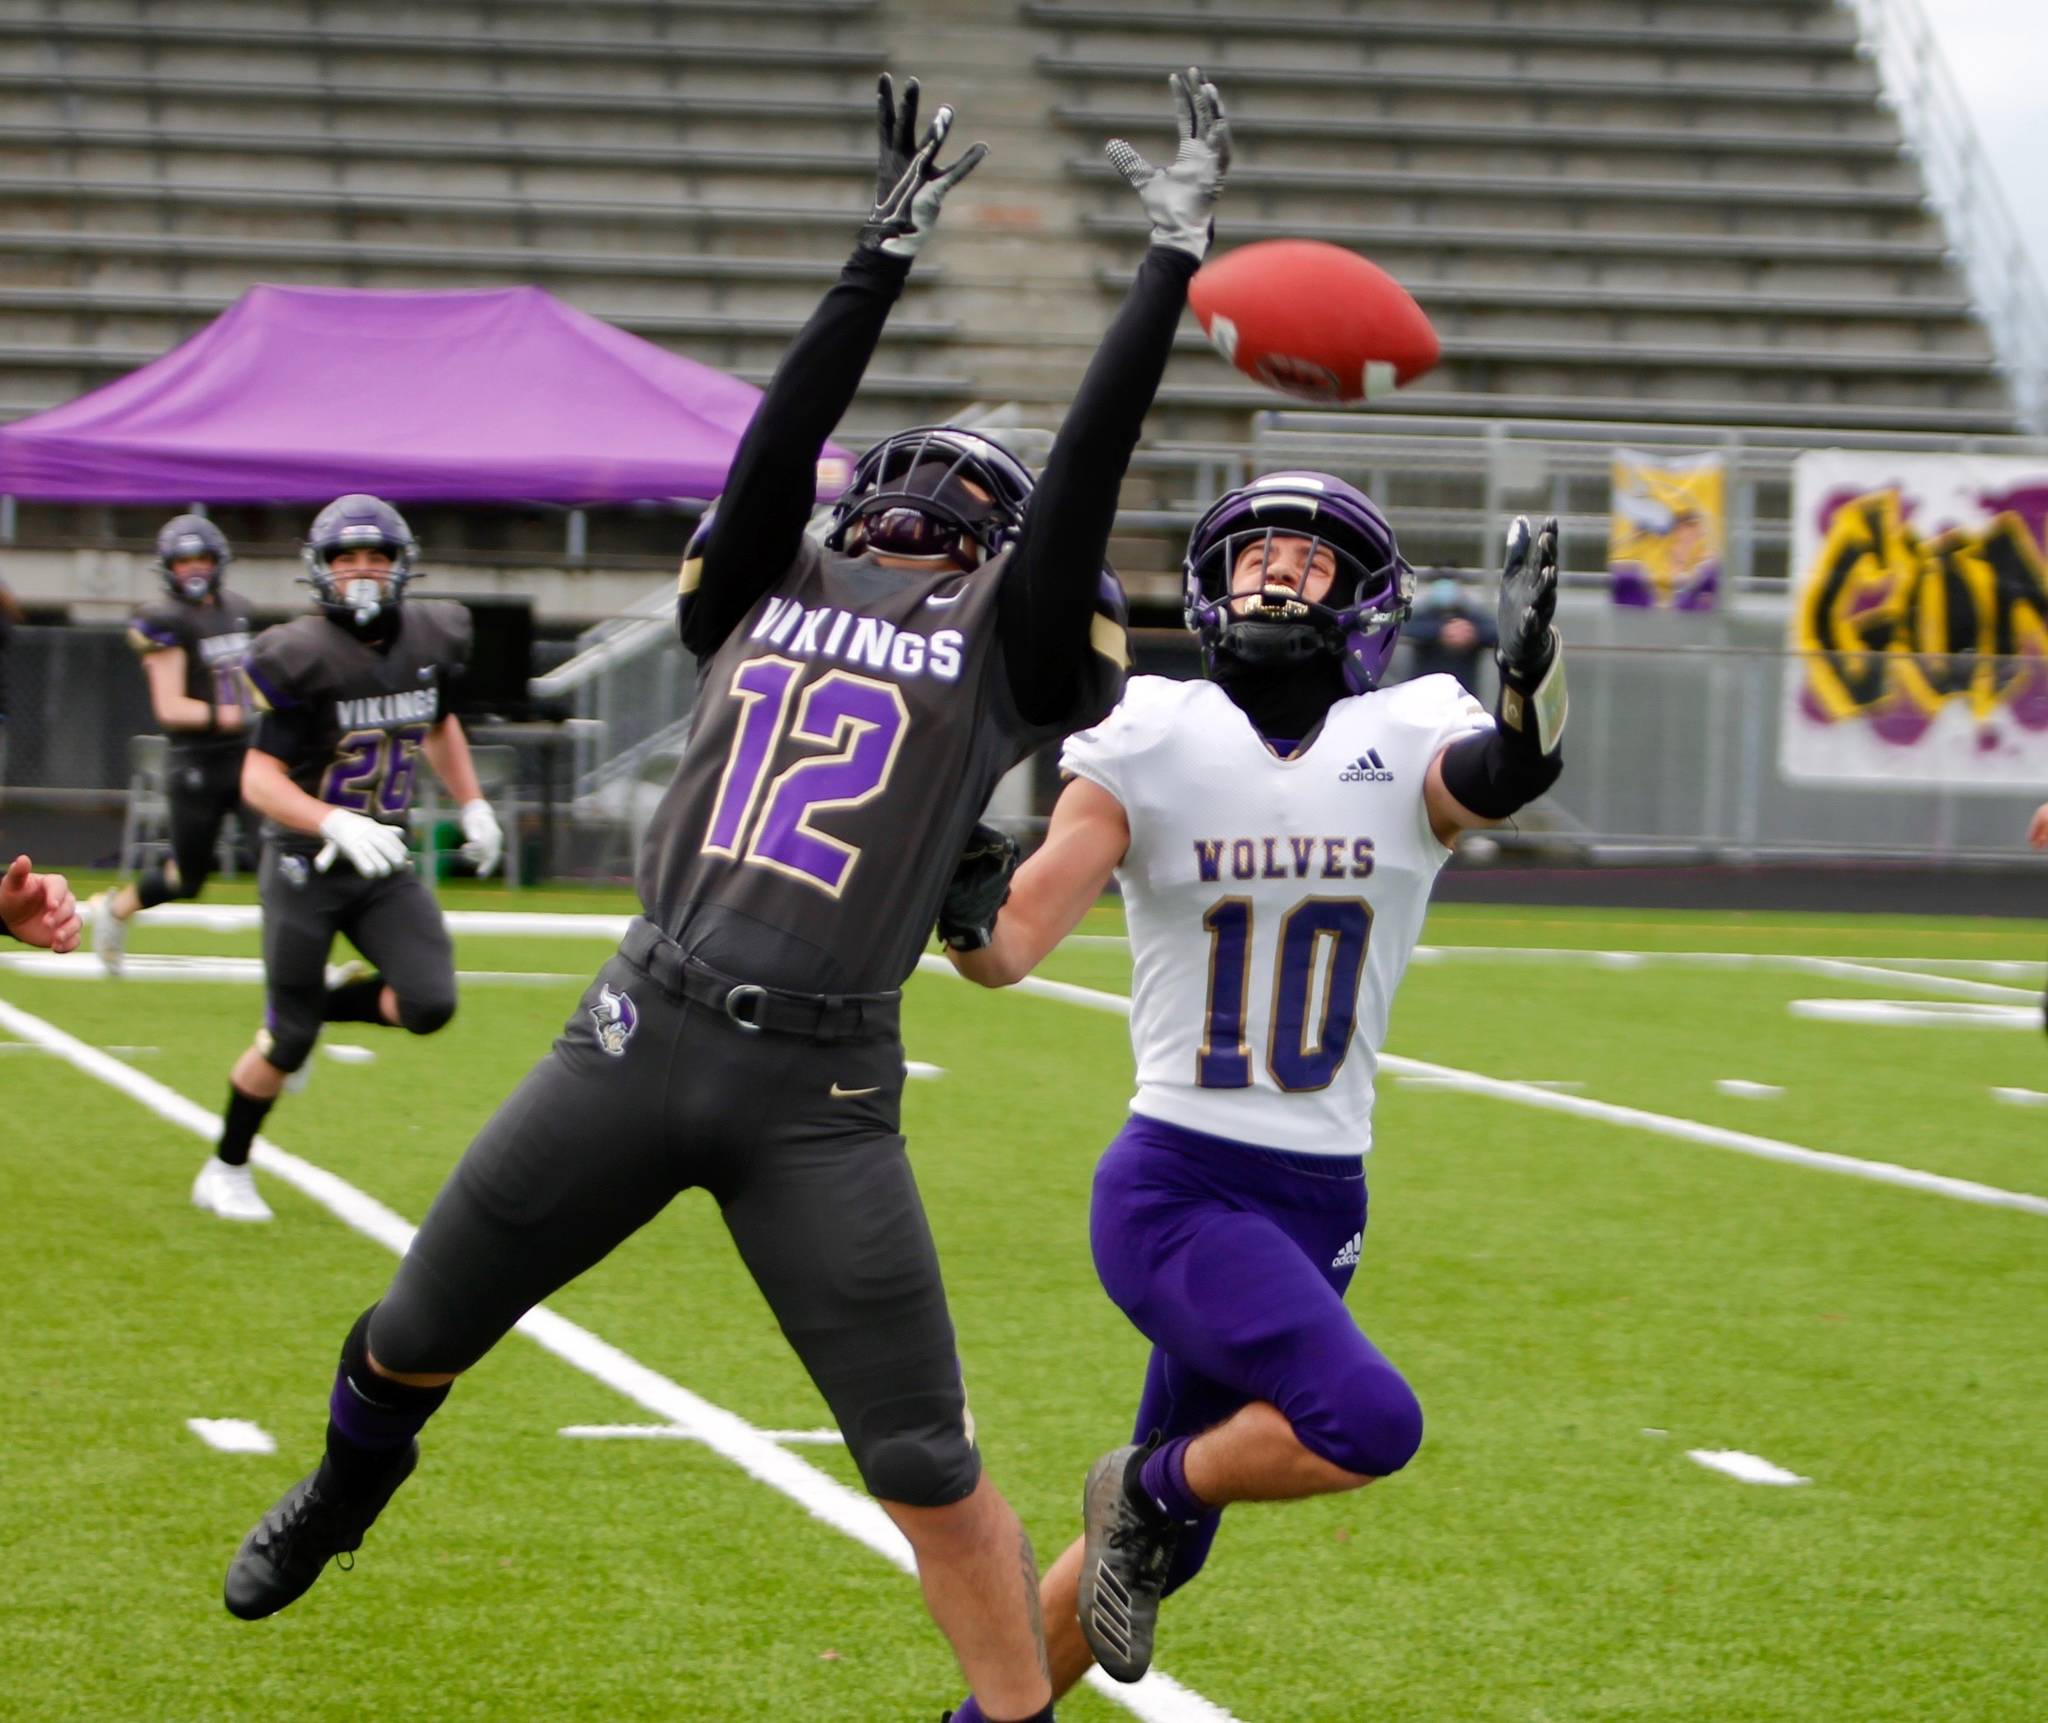 North Kitsap defensive back Lincoln Castillo (12) tries to get a hand on a pass intended for Sequim’s Garrett Hoesel (10). (Mark Krulish/North Kitsap Herald)